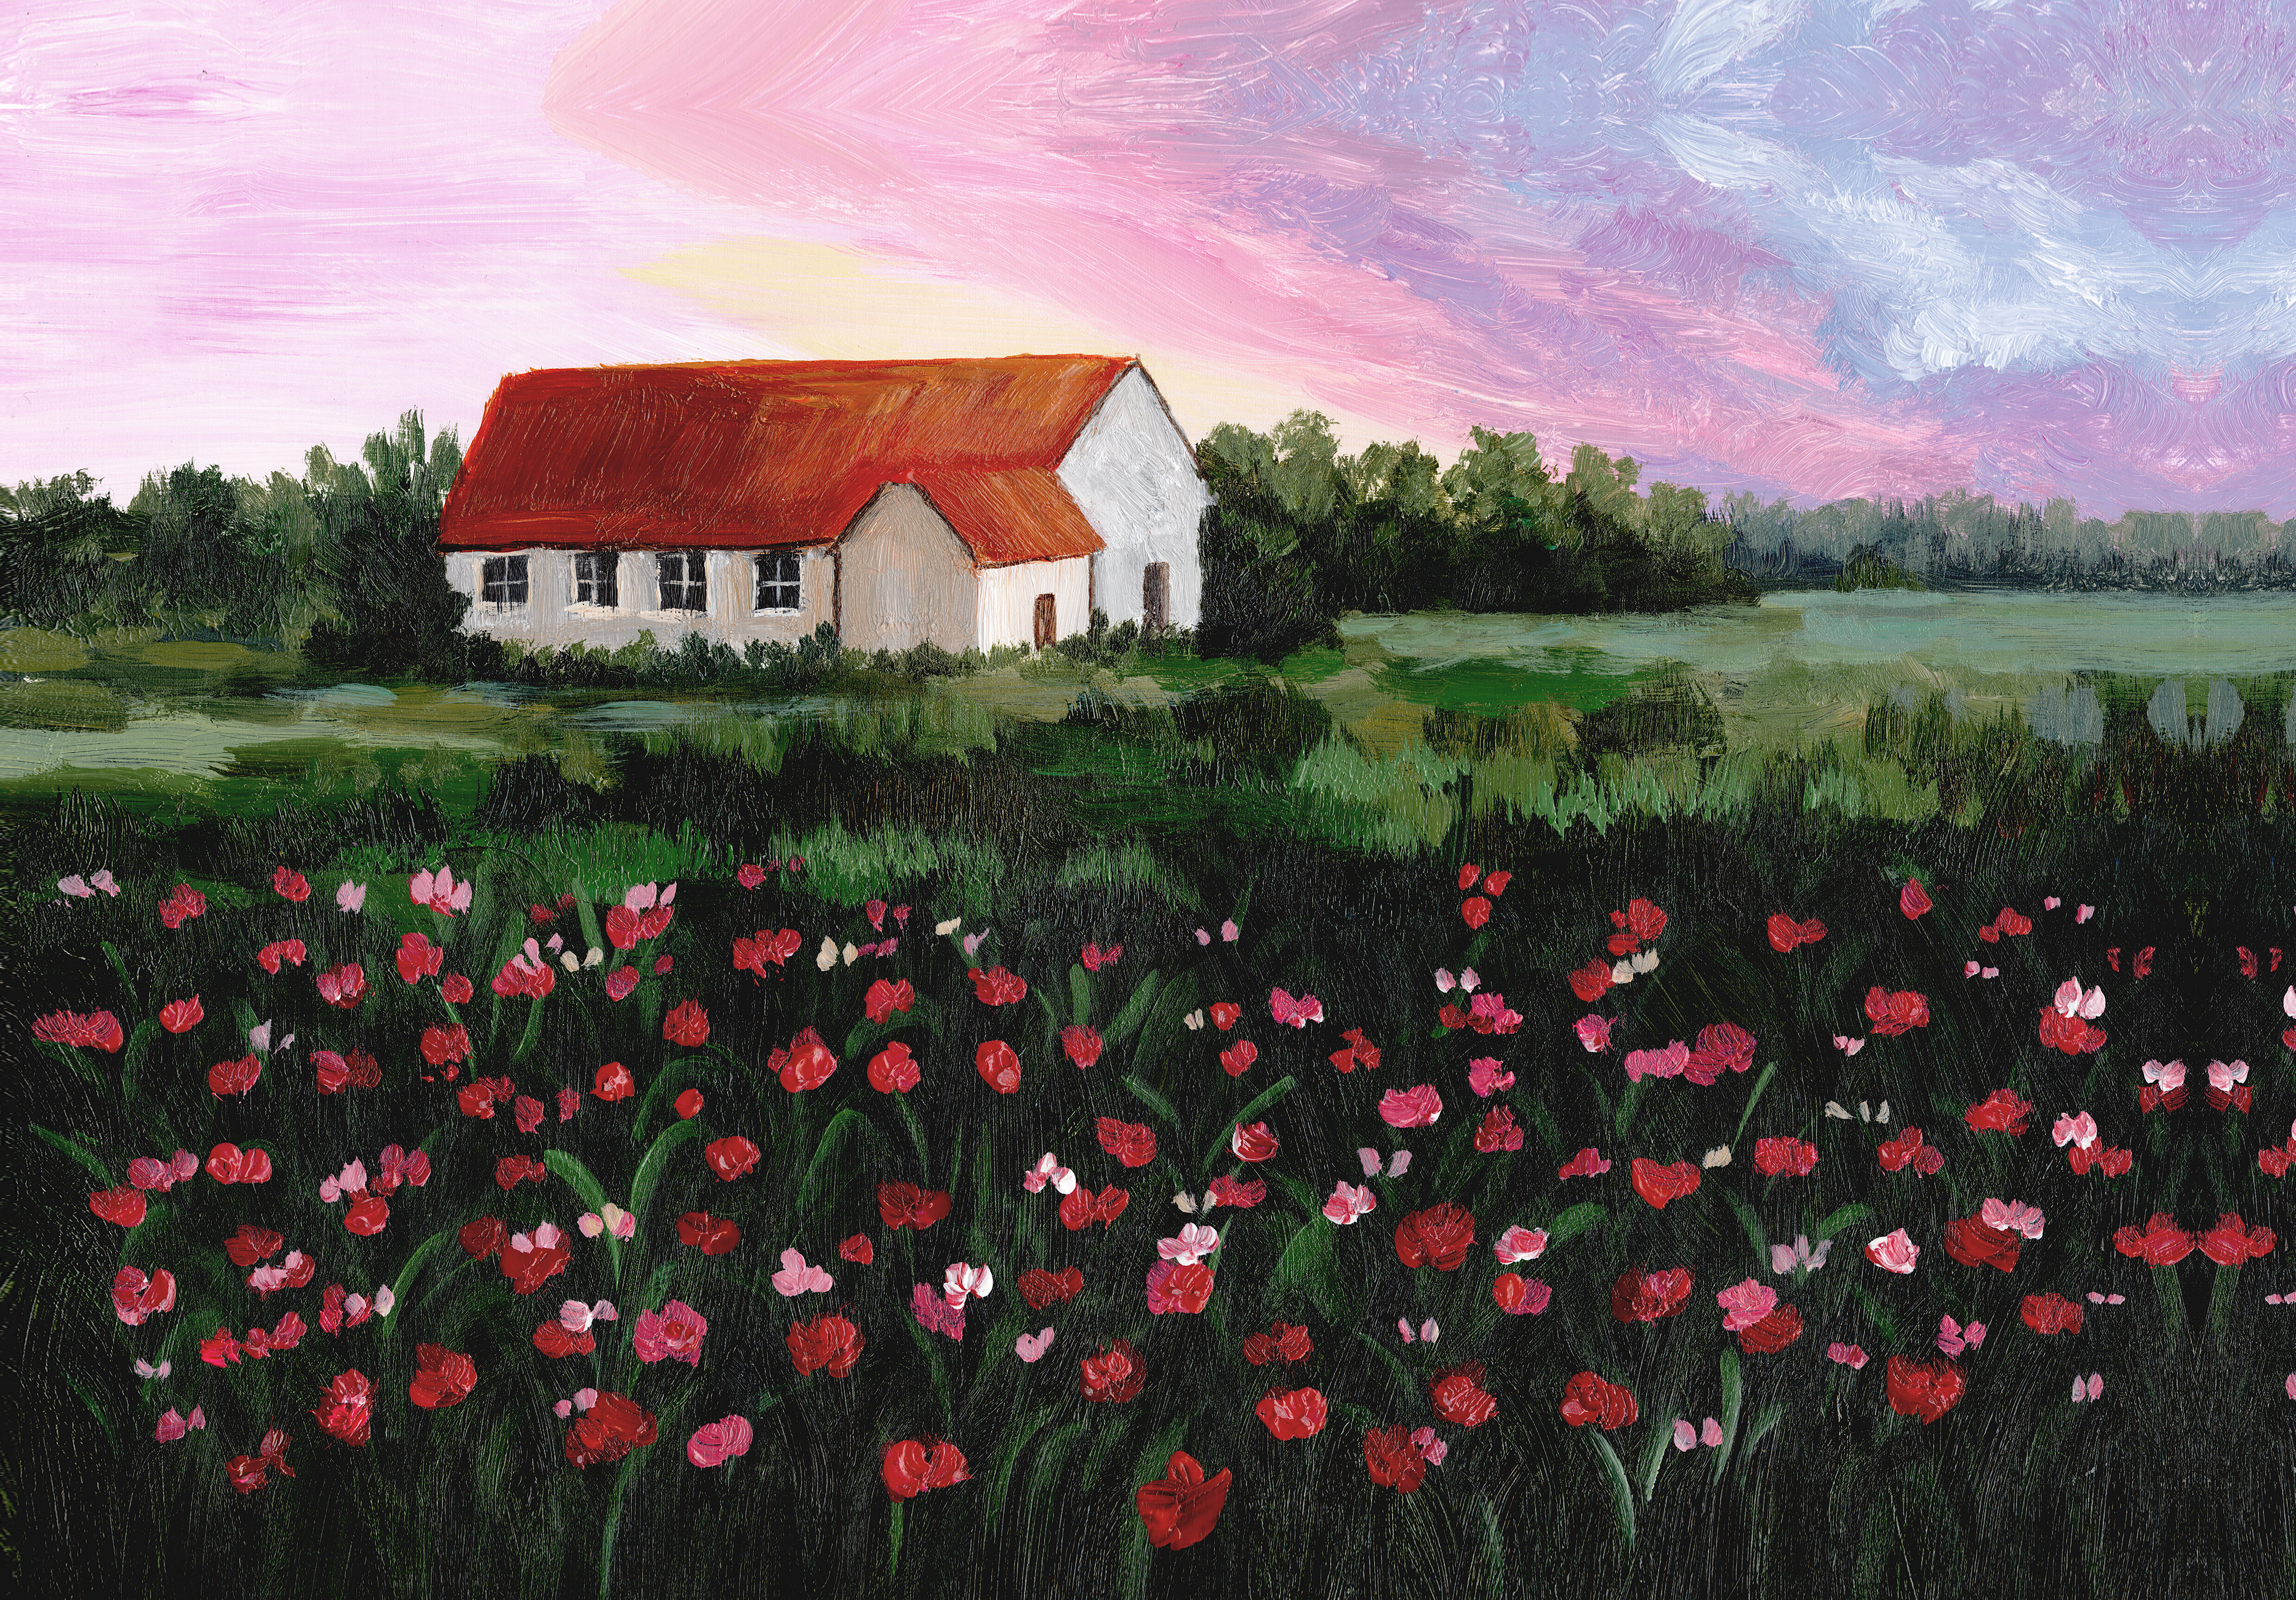 Landscape Painting: Acrylic Mini Canvas Art of a Pink Floral Sunset